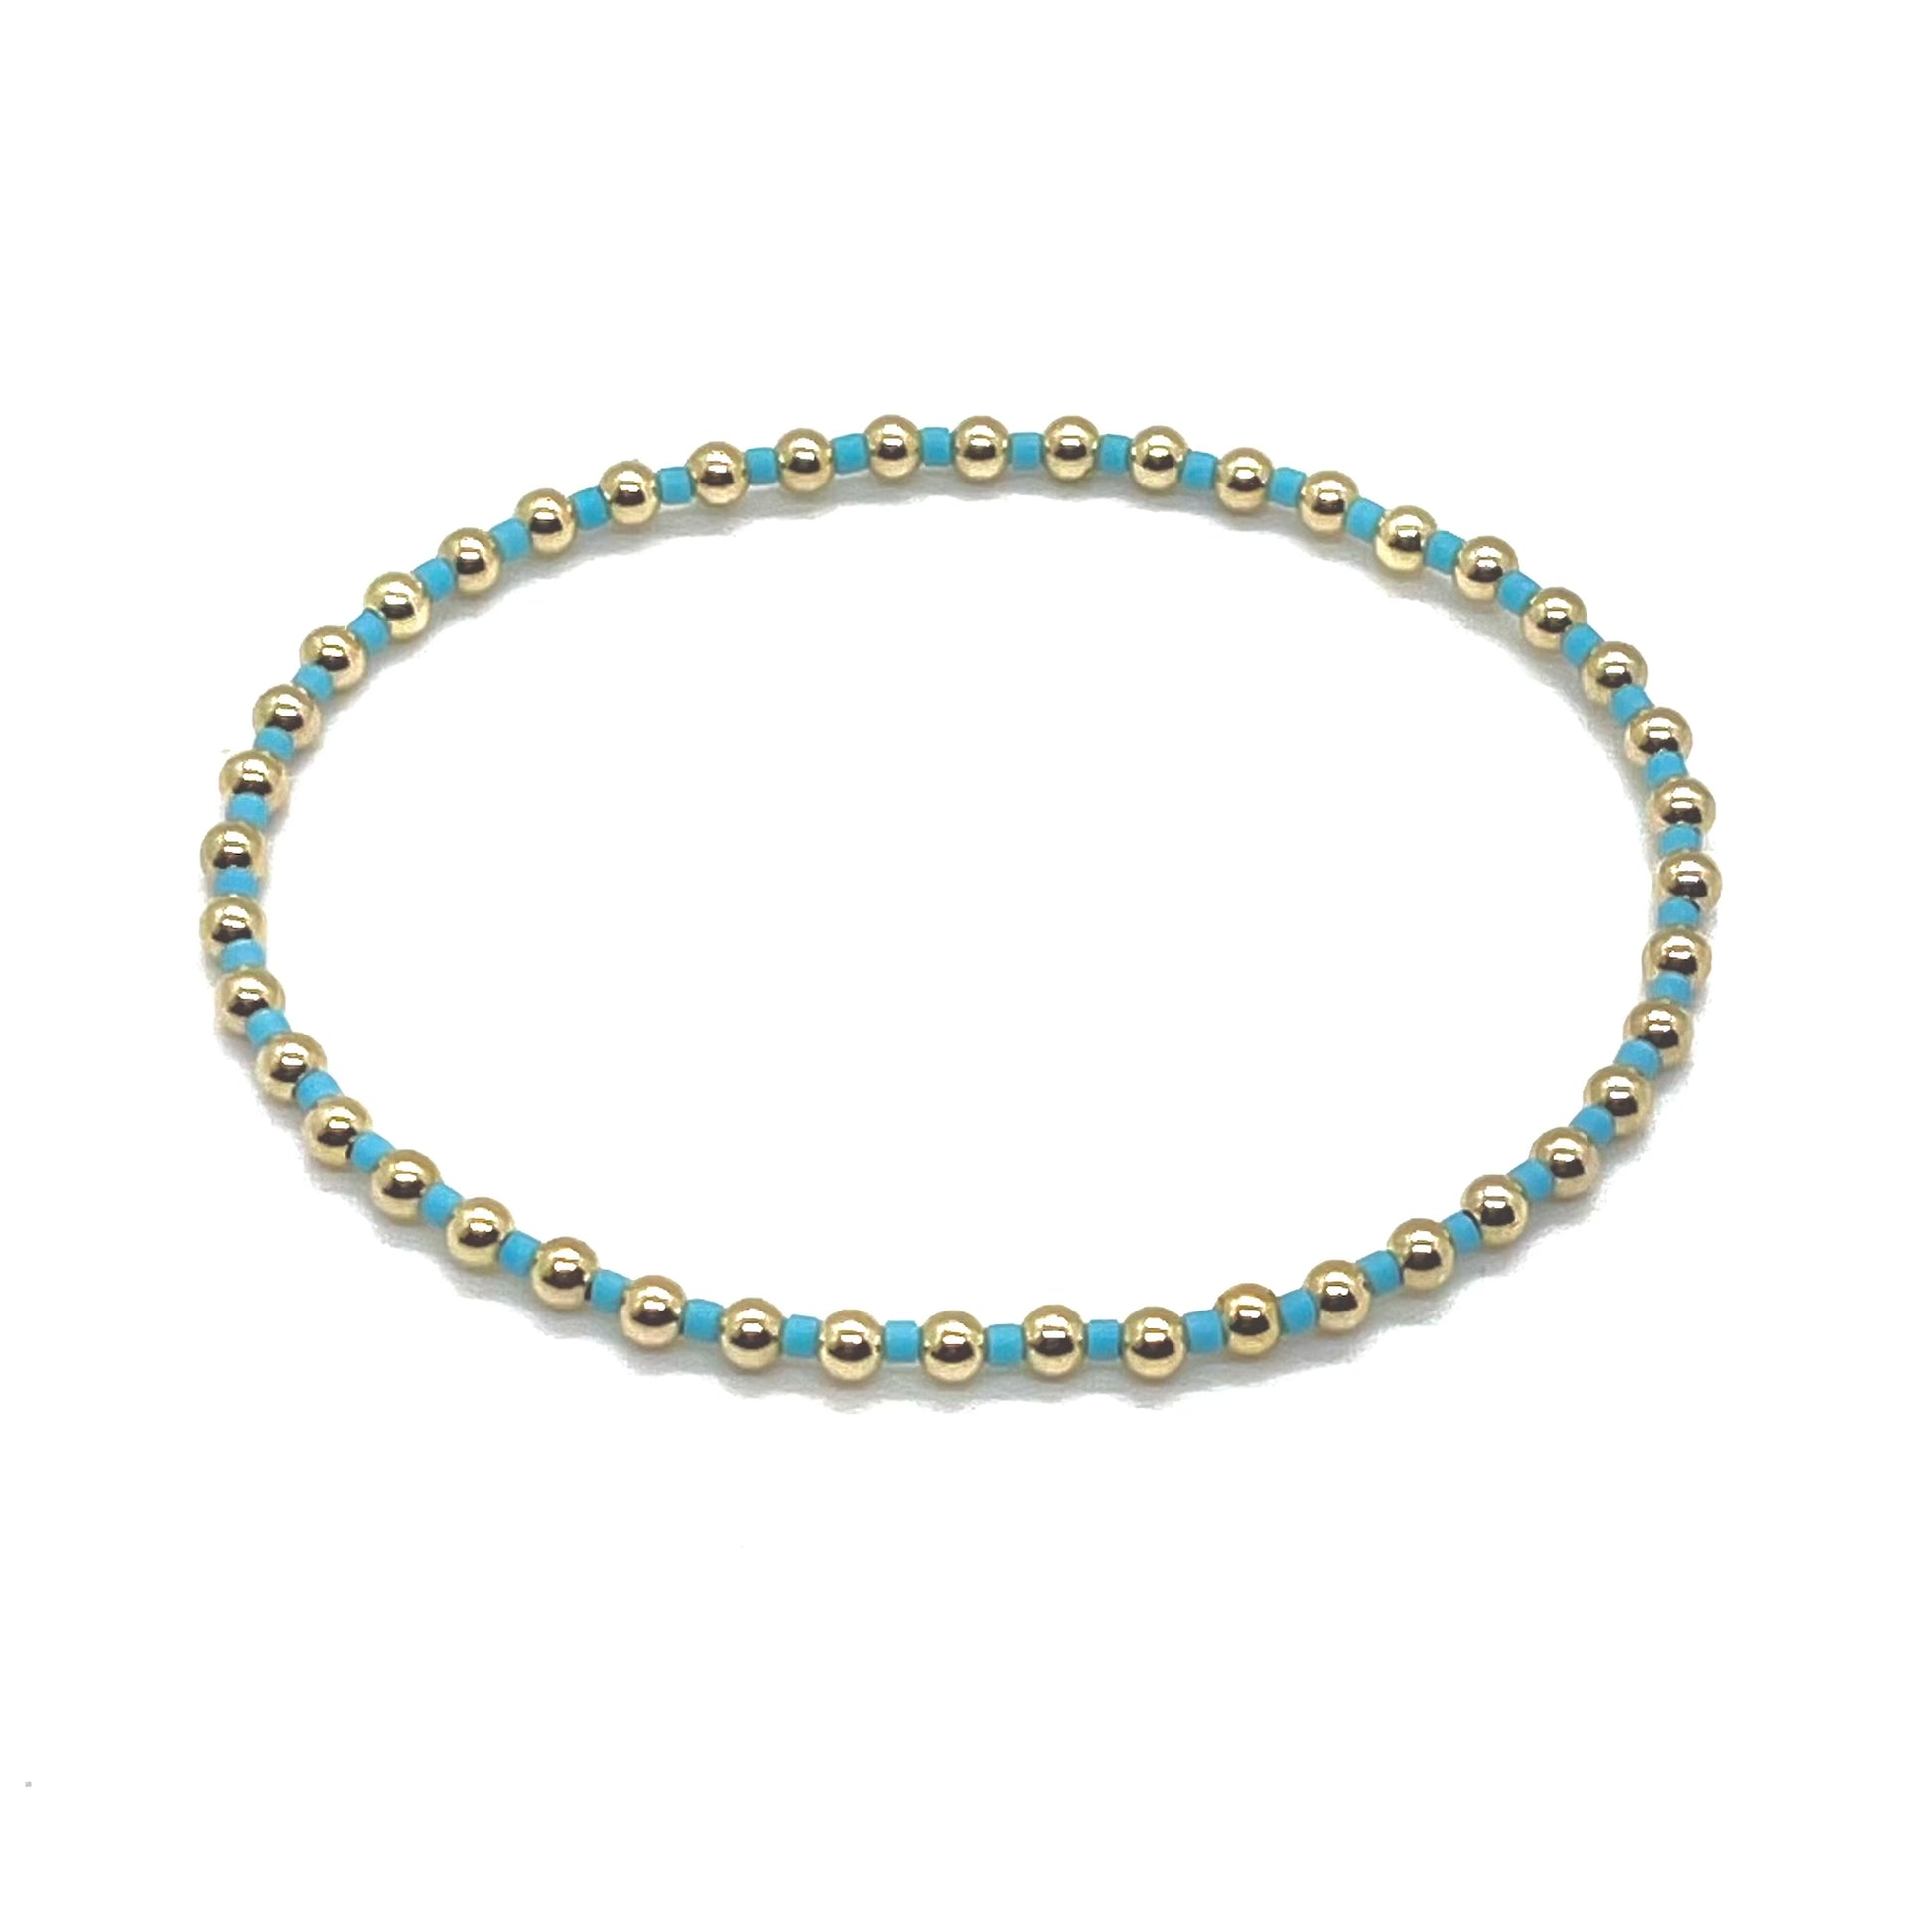 Light blue seed bead and gold ball beaded women's stretch bracelet.